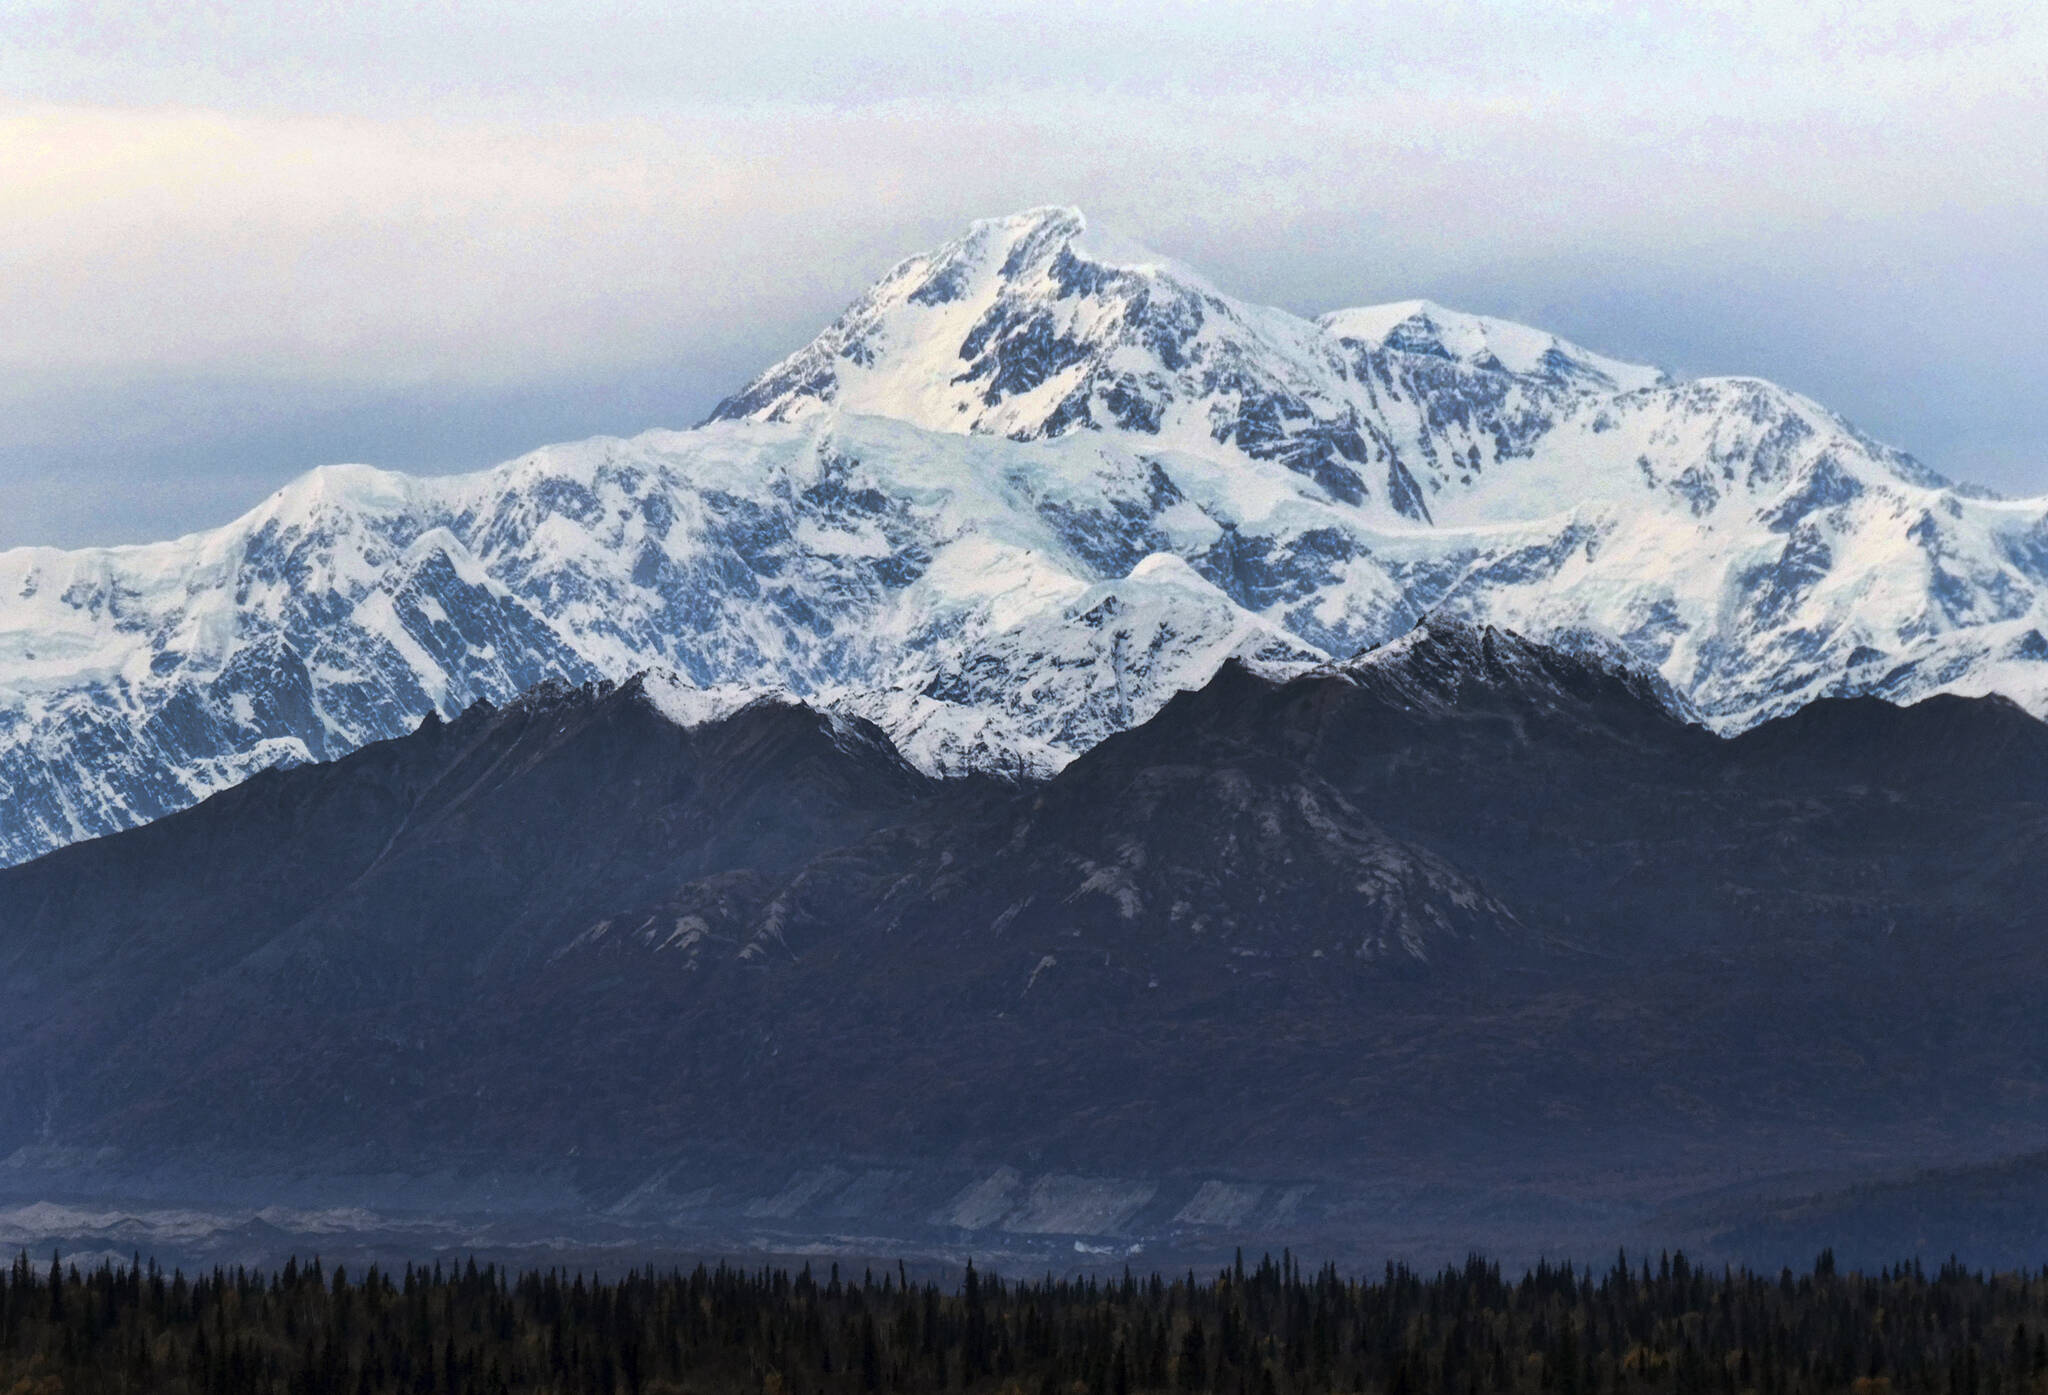 In this Oct. 1, 2017, photo, North America’s tallest peak, Denali, is seen from a turnout in Denali State Park, Alaska. National park rangers in Alaska on Friday, May 6, 2022, resumed an aerial search for the year’s first registered climber on North America’s tallest peak after he didn’t check in with a friend. (AP Photo/Becky Bohrer, File)